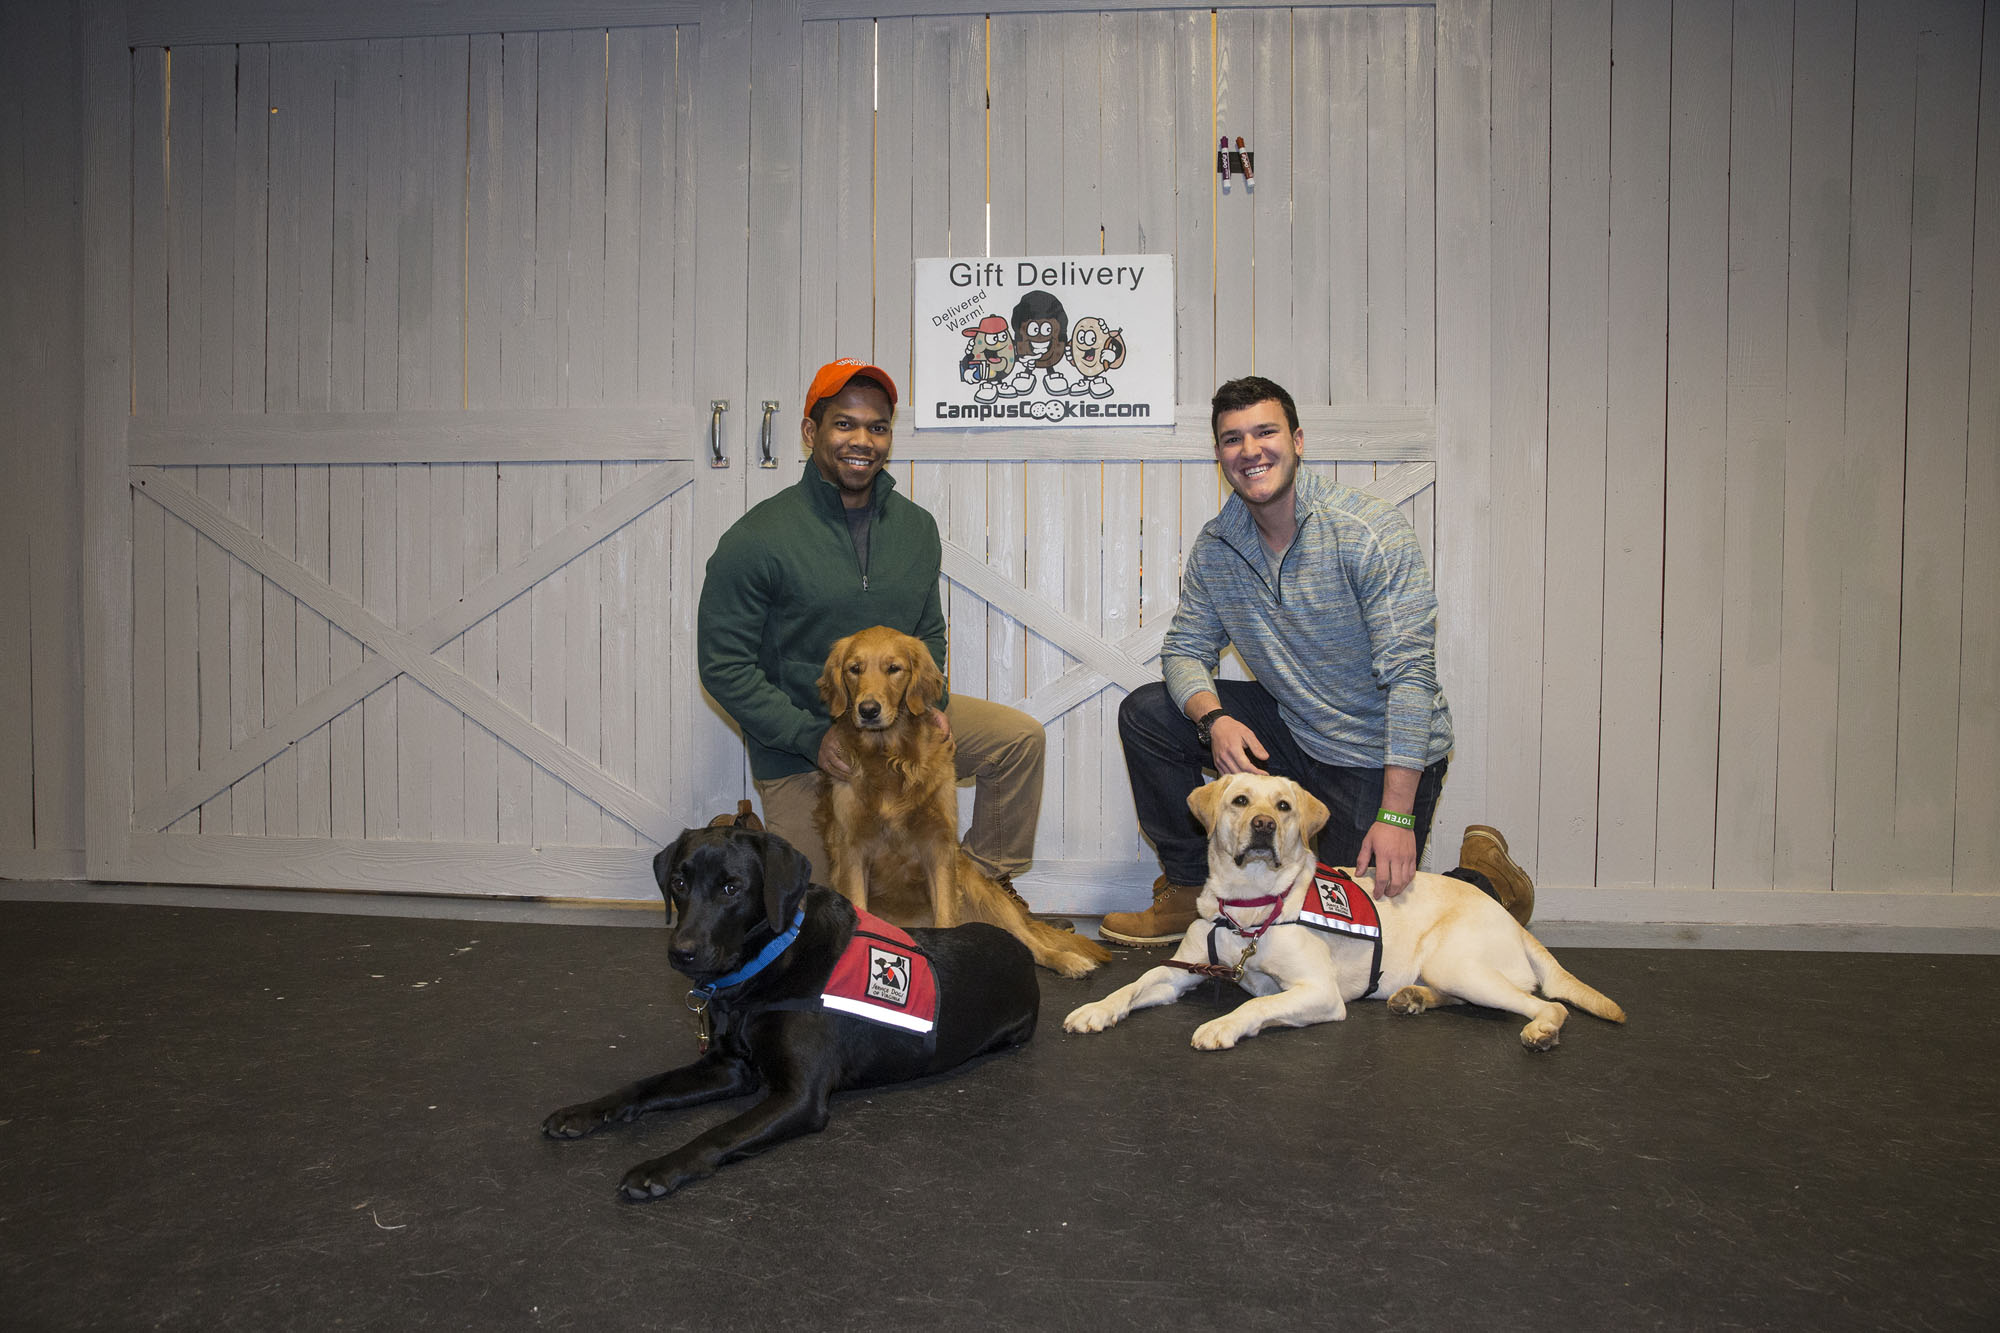 Totem founders P.J. Harris, left, and Kyle Matthews kneel on the ground with three dogs